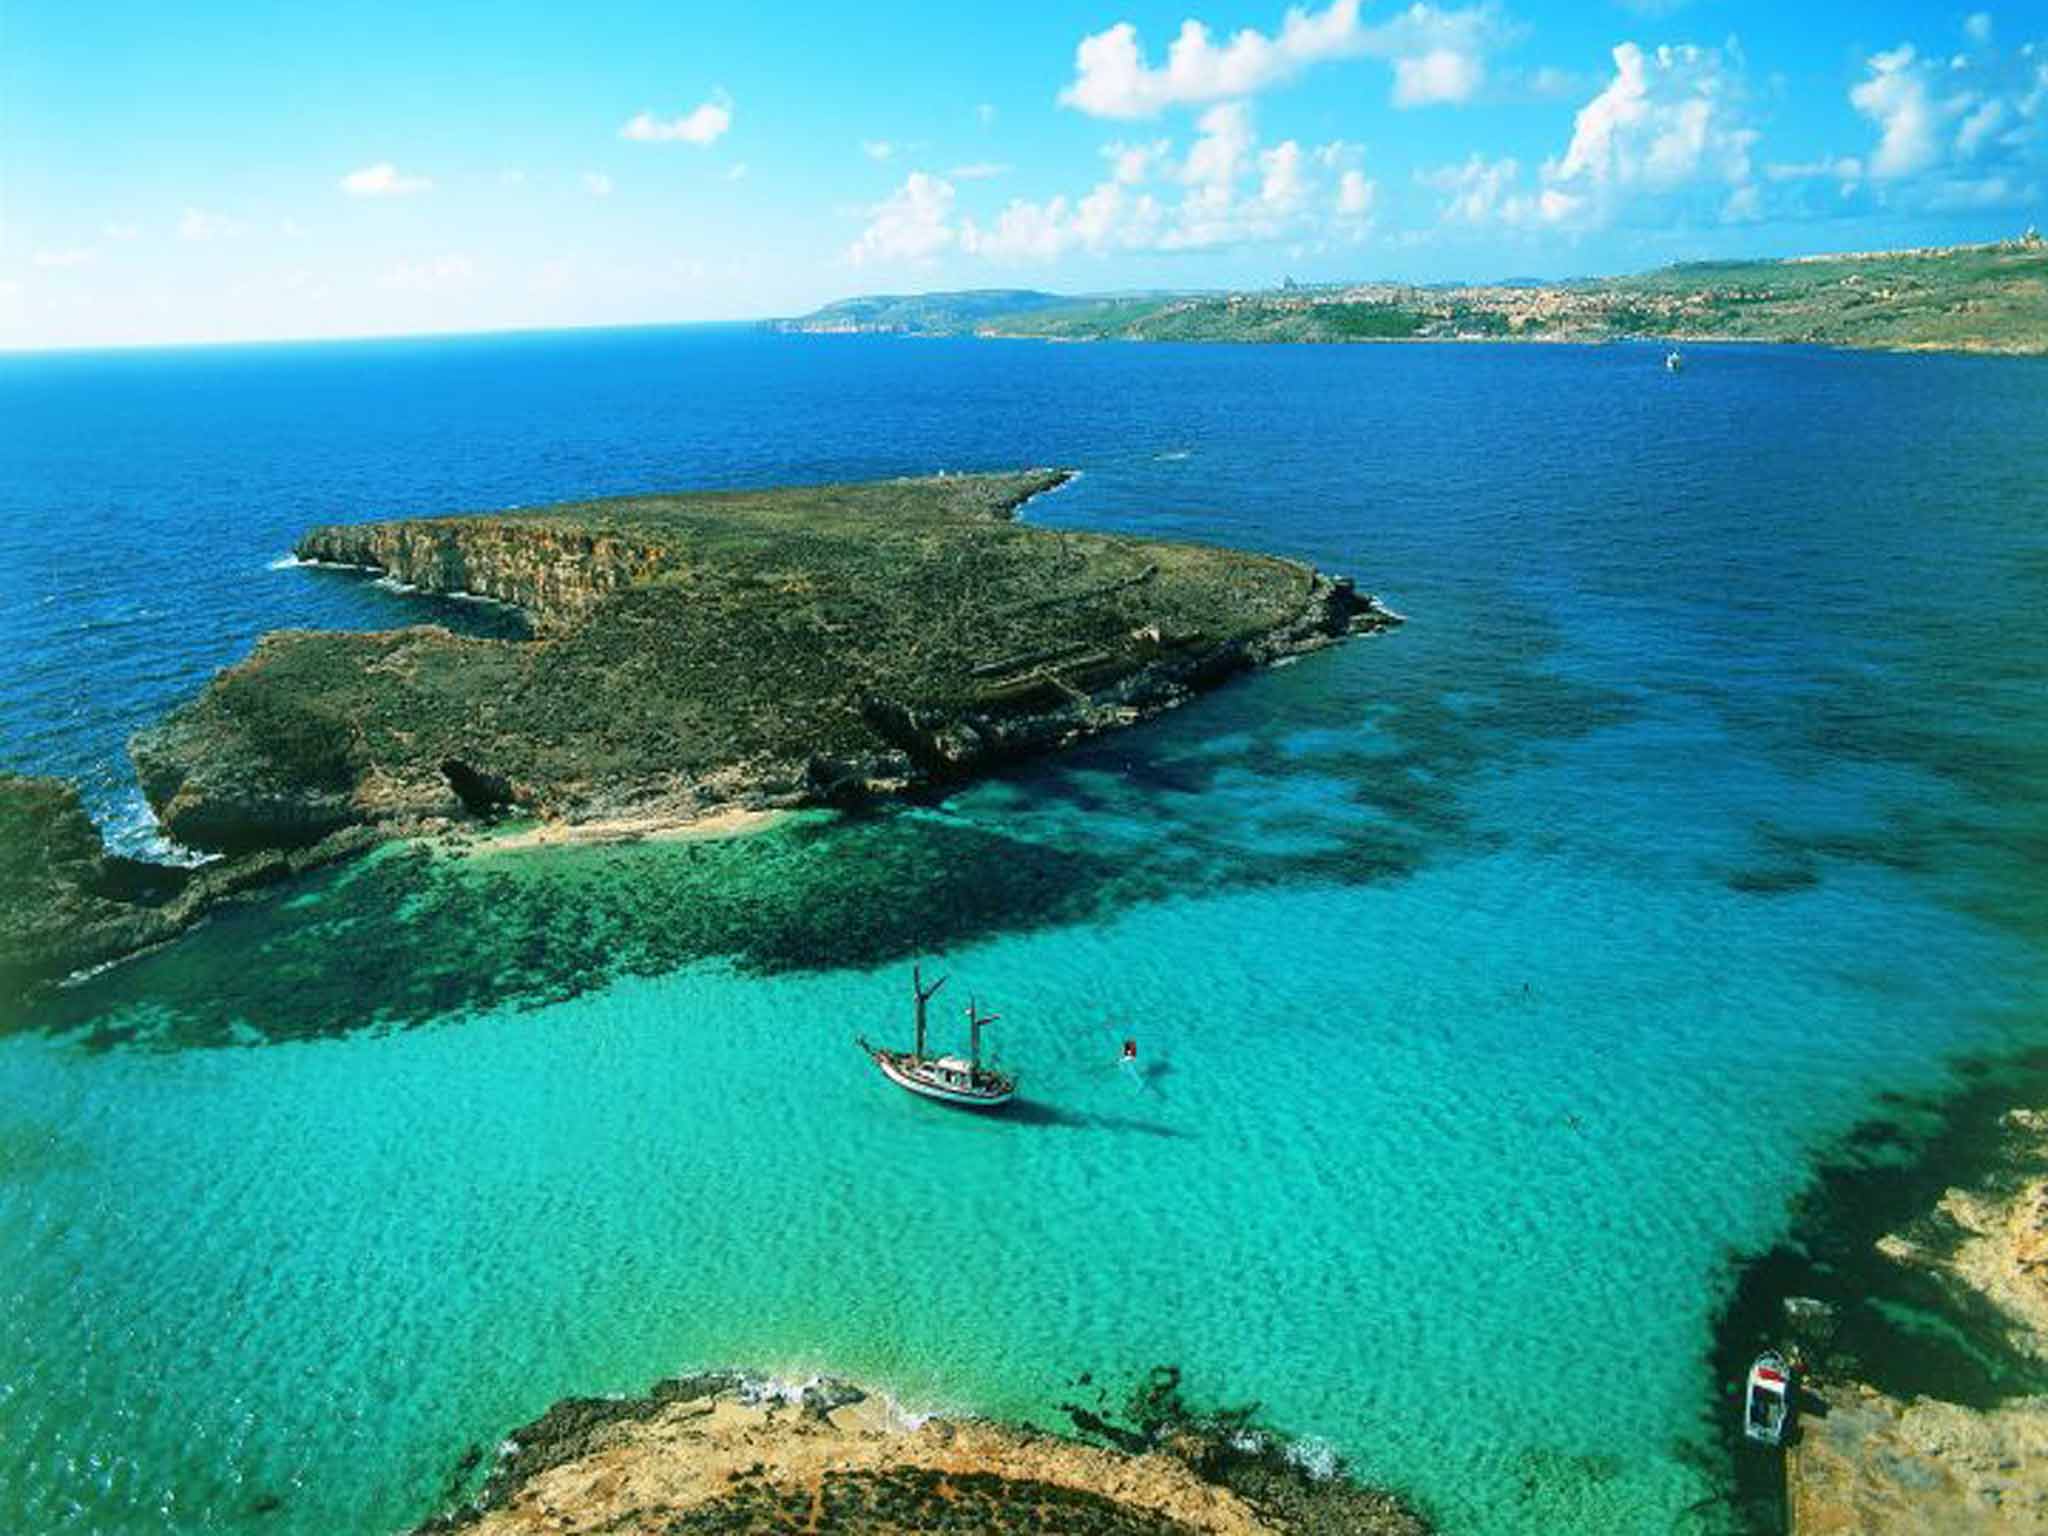 The Blue Lagoon in Malta is a popular spot for tourists